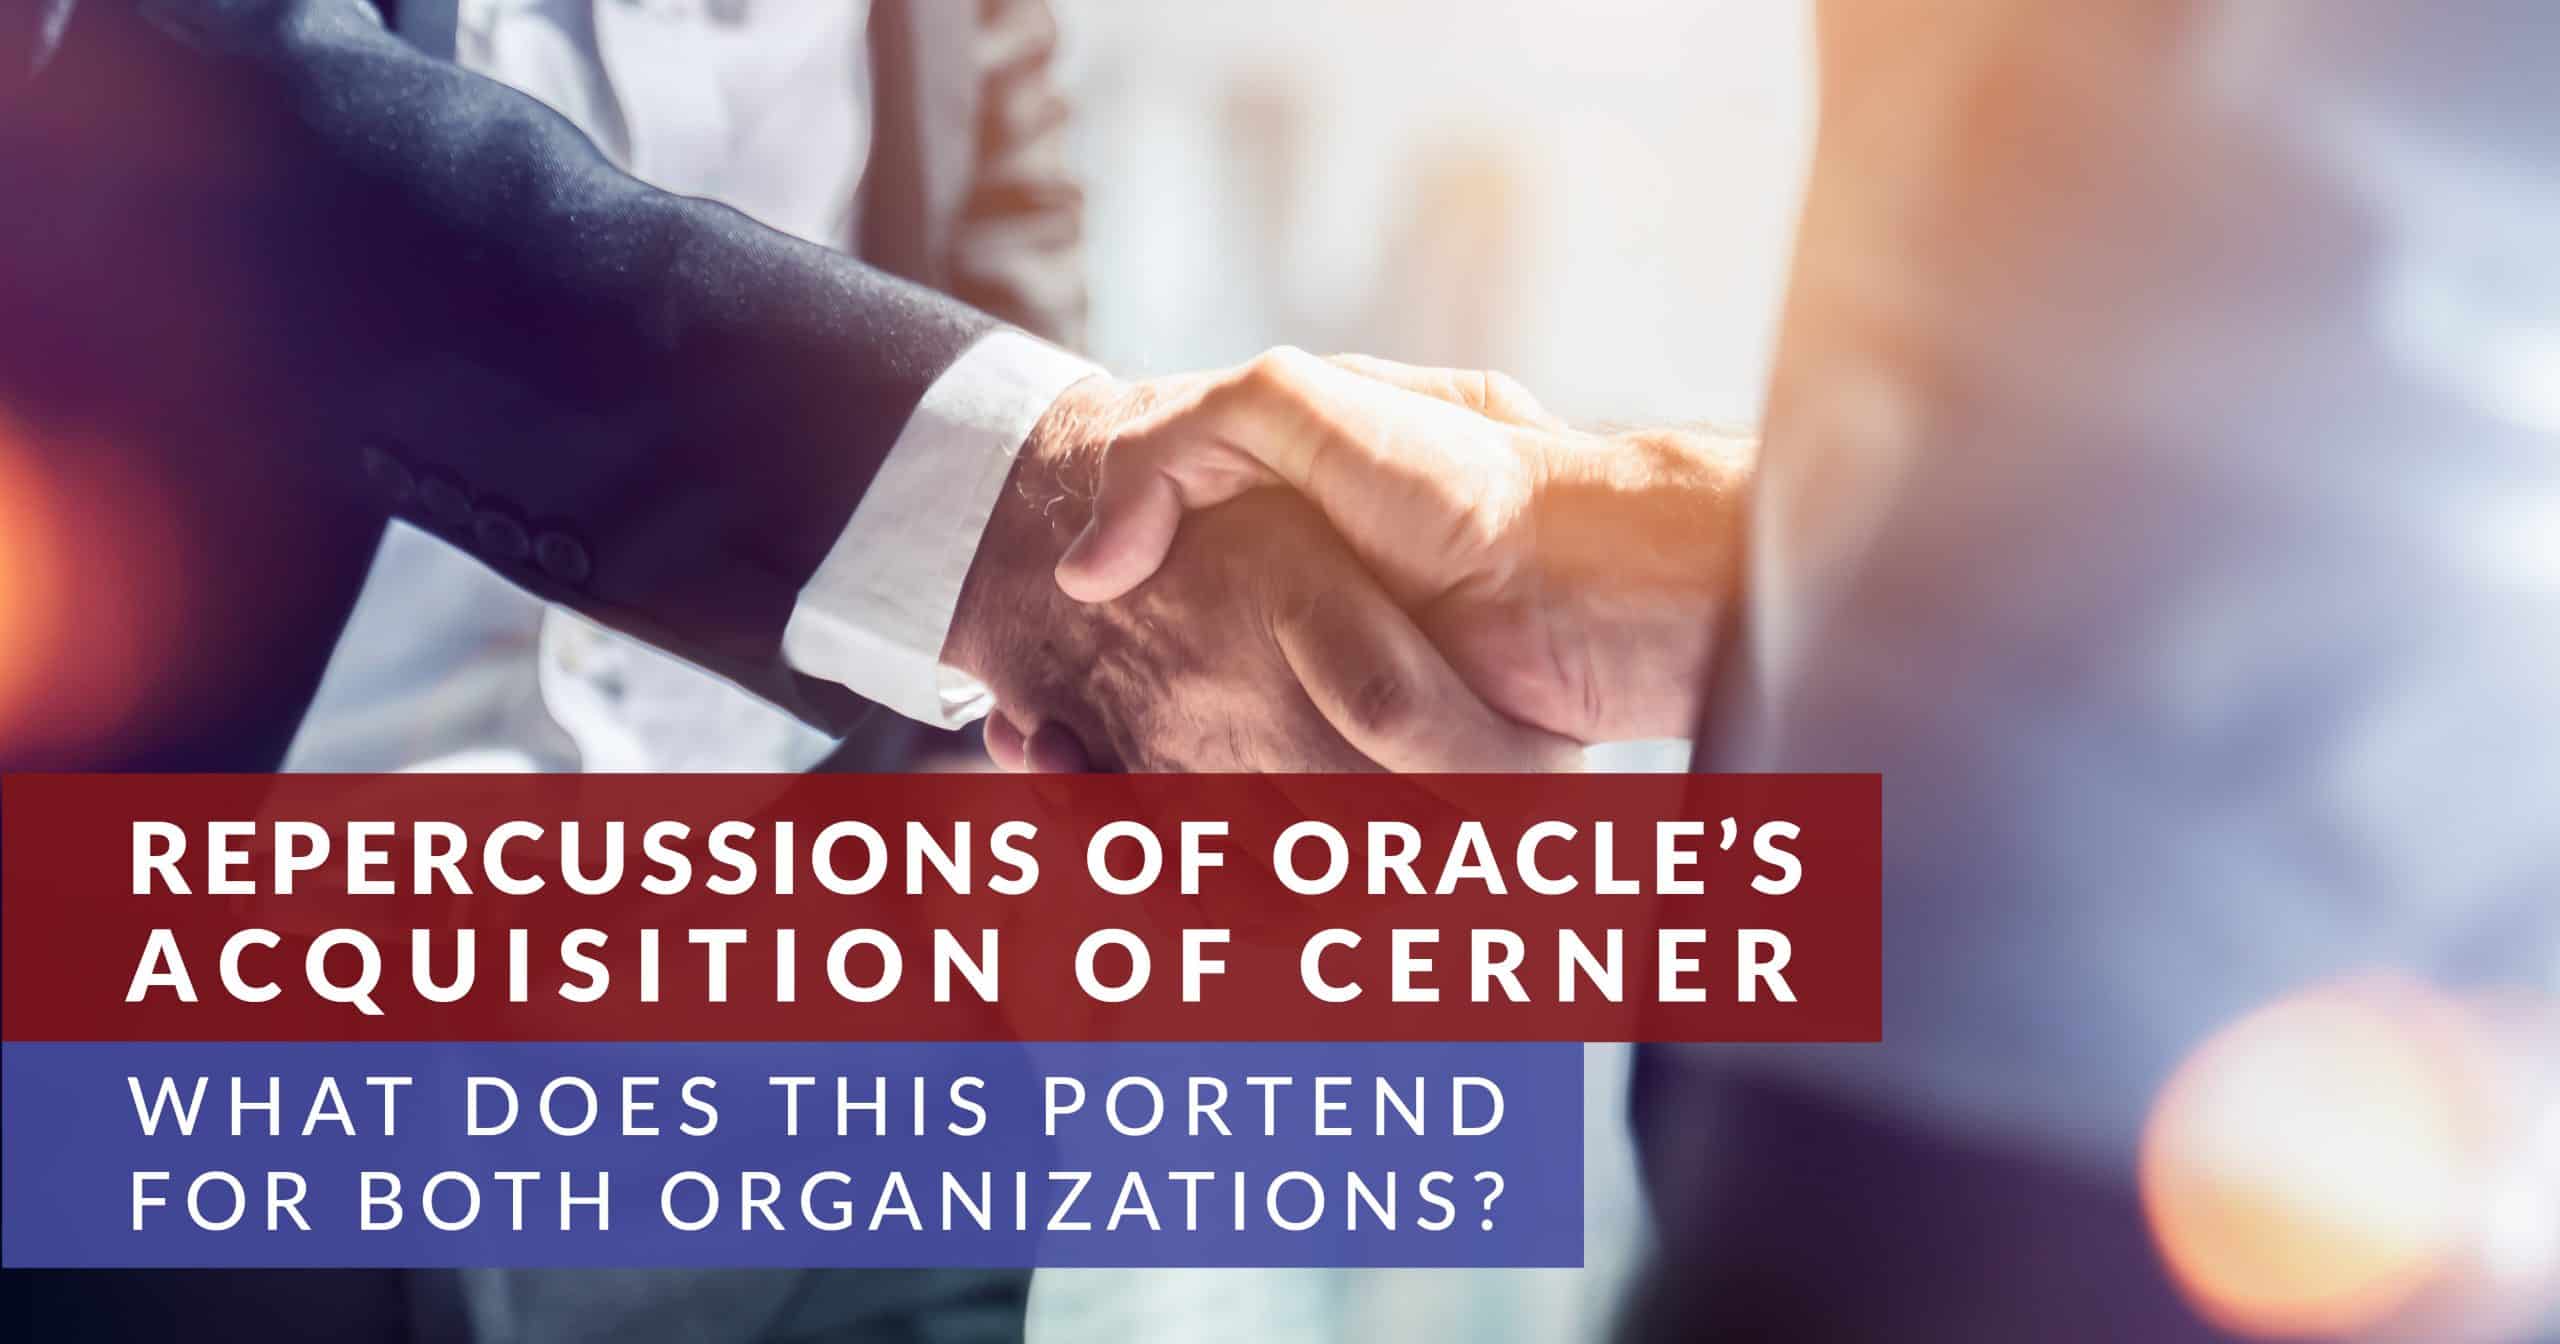 The Repercussions of Oracle’s Acquisition of Cerner